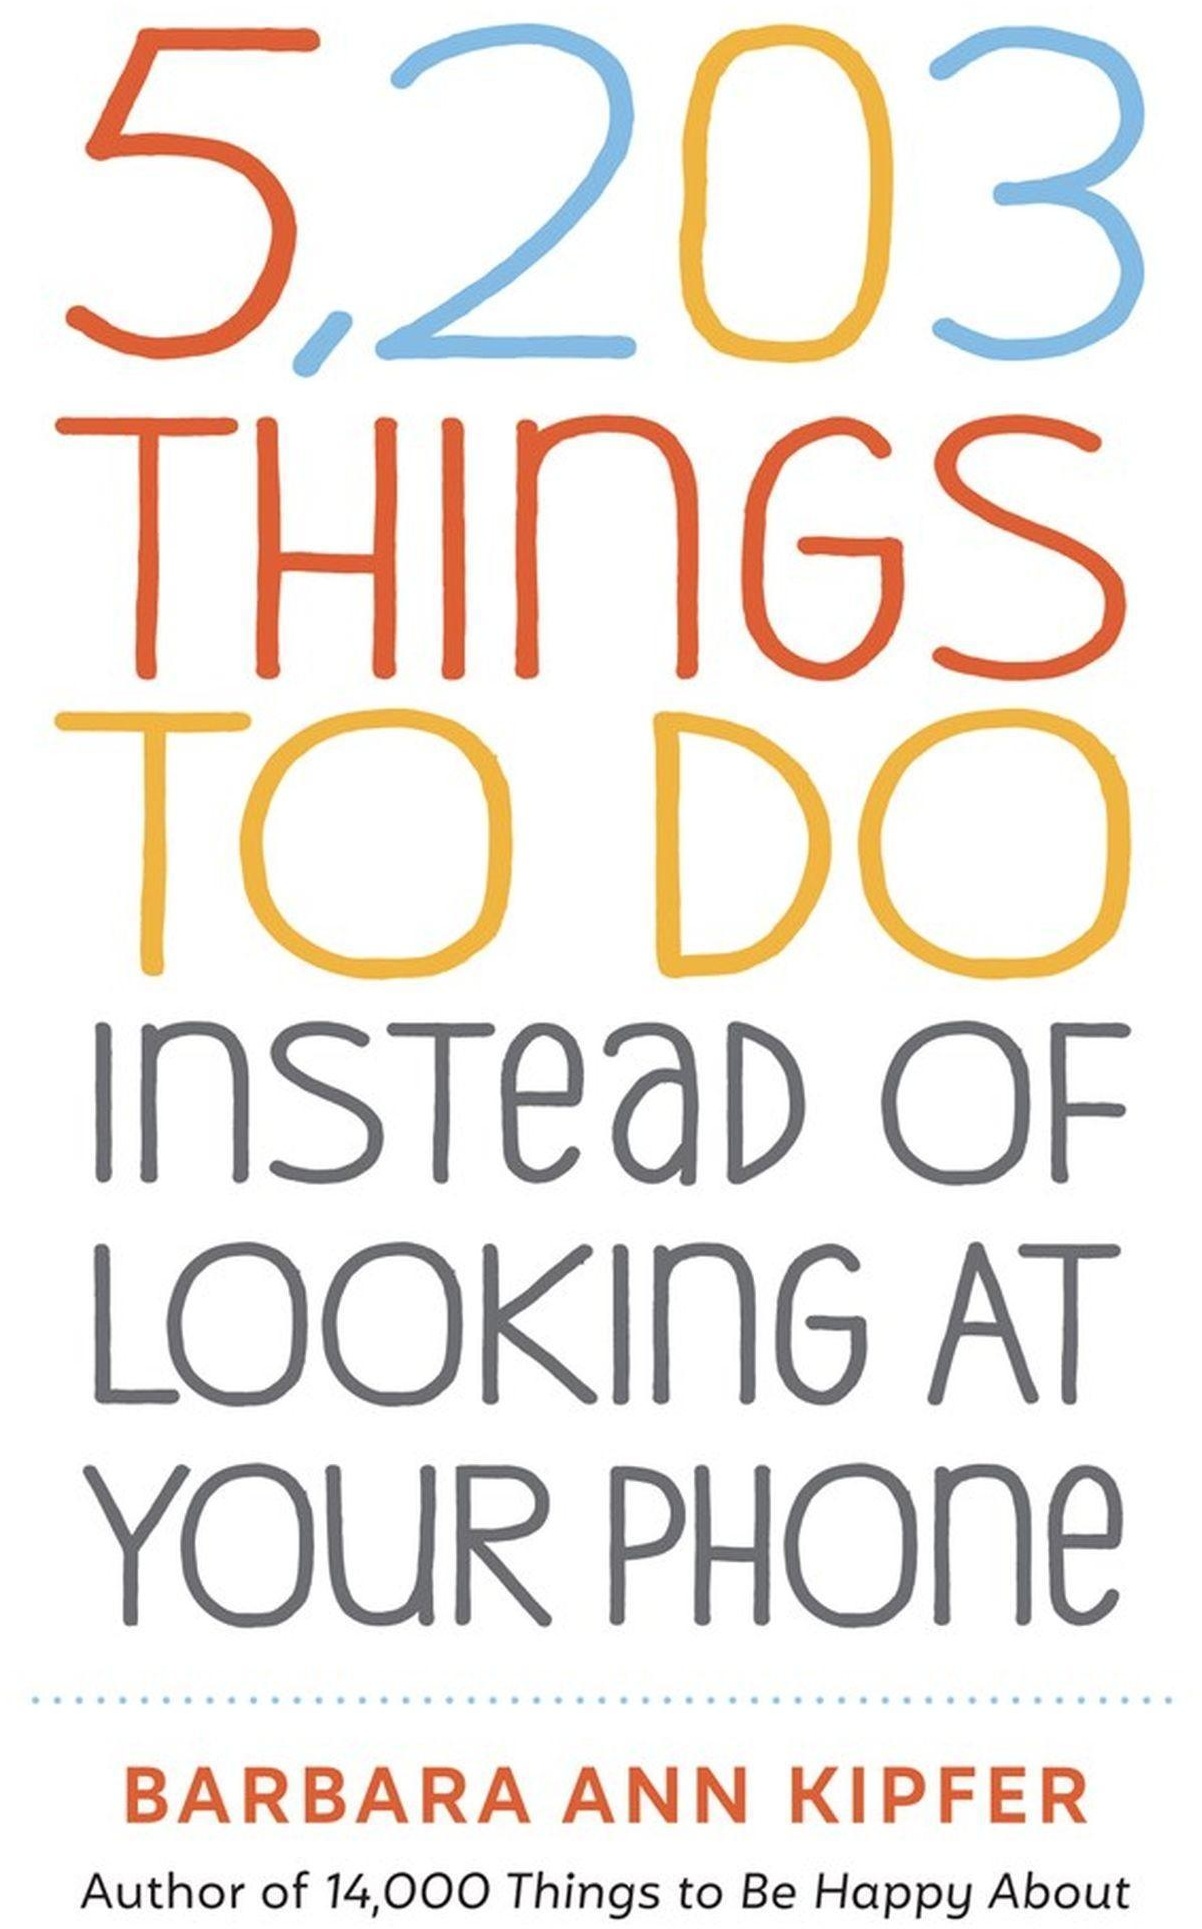 5 203 Things To Do Instead Of Looking At Your Phone - Barbara Ann Kipfer  Taschenbuch